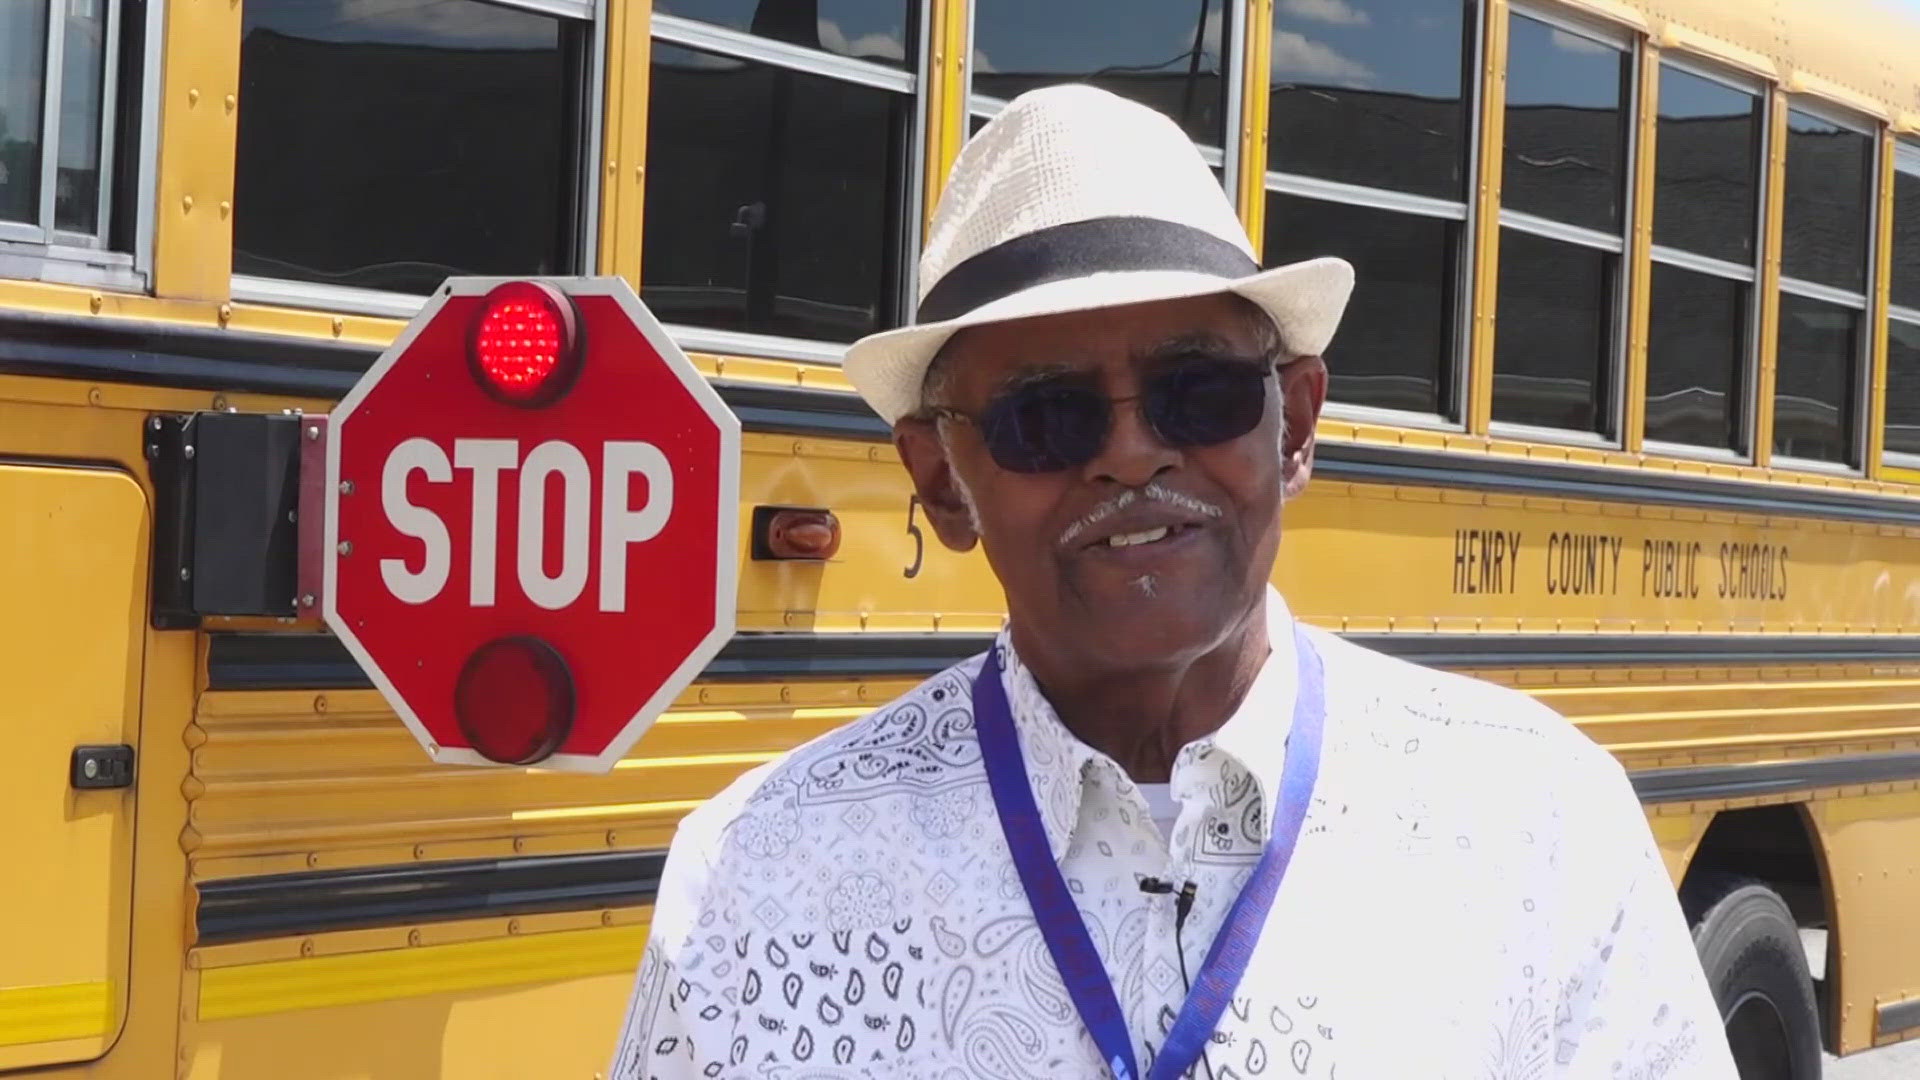 After decades of work and service, a bus driver in Virginia is getting a well deserved retirement -- and that is getting us uplifted.